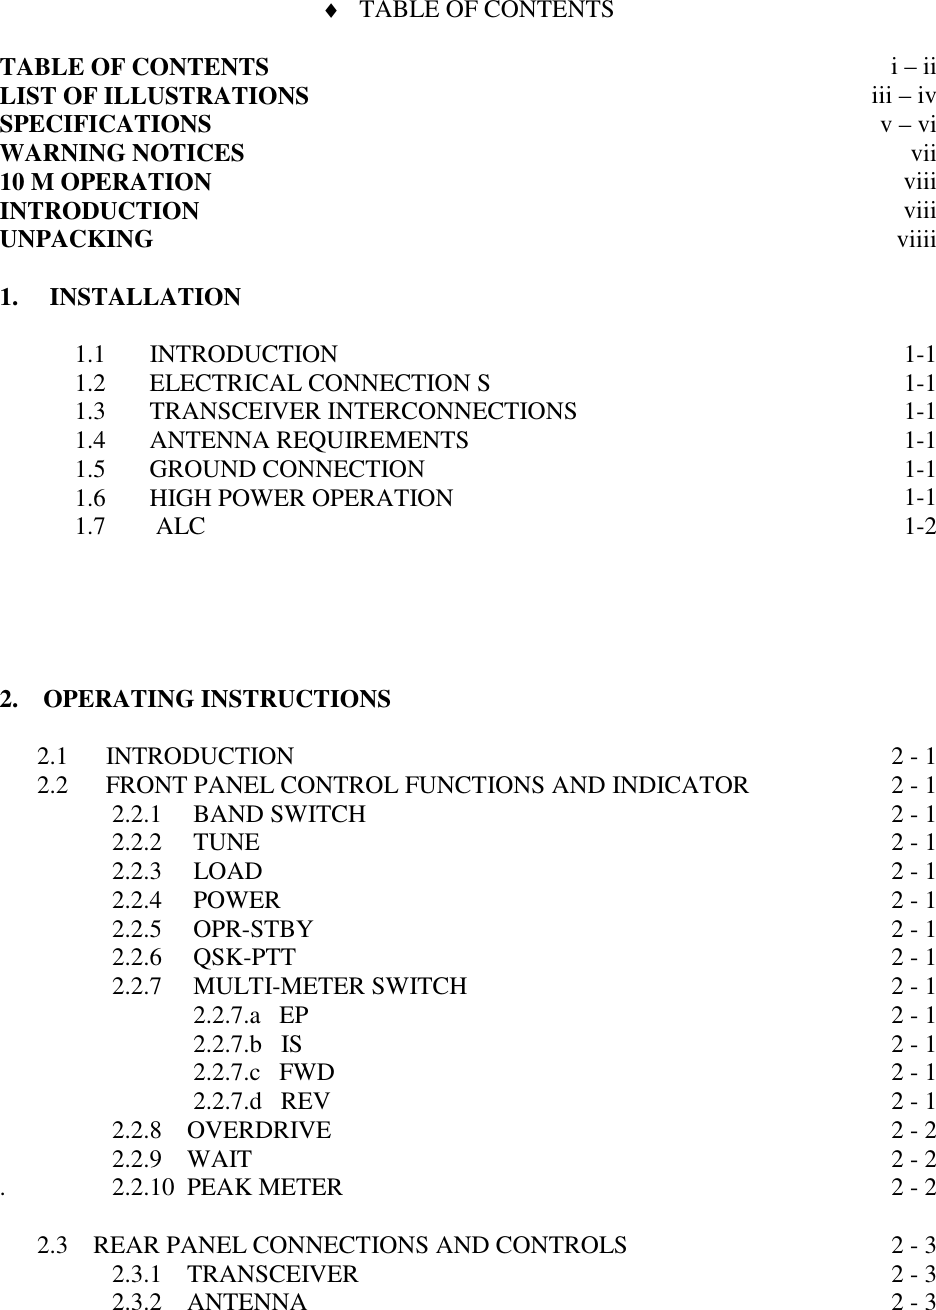 ♦ TABLE OF CONTENTSTABLE OF CONTENTSLIST OF ILLUSTRATIONSSPECIFICATIONSWARNING NOTICES10 M OPERATIONINTRODUCTIONUNPACKINGi – iiiii – ivv – viviiviiiviiiviiii1.     INSTALLATION1.1       INTRODUCTION1.2       ELECTRICAL CONNECTION S1.3       TRANSCEIVER INTERCONNECTIONS1.4       ANTENNA REQUIREMENTS1.5       GROUND CONNECTION1.6       HIGH POWER OPERATION1.7        ALC1-11-11-11-11-11-11-22.    OPERATING INSTRUCTIONS2.1      INTRODUCTION2.2      FRONT PANEL CONTROL FUNCTIONS AND INDICATOR                  2.2.1     BAND SWITCH                  2.2.2     TUNE                  2.2.3     LOAD                  2.2.4     POWER                  2.2.5     OPR-STBY                  2.2.6     QSK-PTT                  2.2.7     MULTI-METER SWITCH                               2.2.7.a   EP                               2.2.7.b   IS                               2.2.7.c   FWD                               2.2.7.d   REV                  2.2.8    OVERDRIVE                  2.2.9    WAIT.                 2.2.10  PEAK METER      2.3    REAR PANEL CONNECTIONS AND CONTROLS                  2.3.1    TRANSCEIVER                  2.3.2    ANTENNA 2 - 12 - 12 - 12 - 12 - 12 - 12 - 12 - 12 - 12 - 12 - 12 - 12 - 12 - 22 - 22 - 22 - 32 - 32 - 3